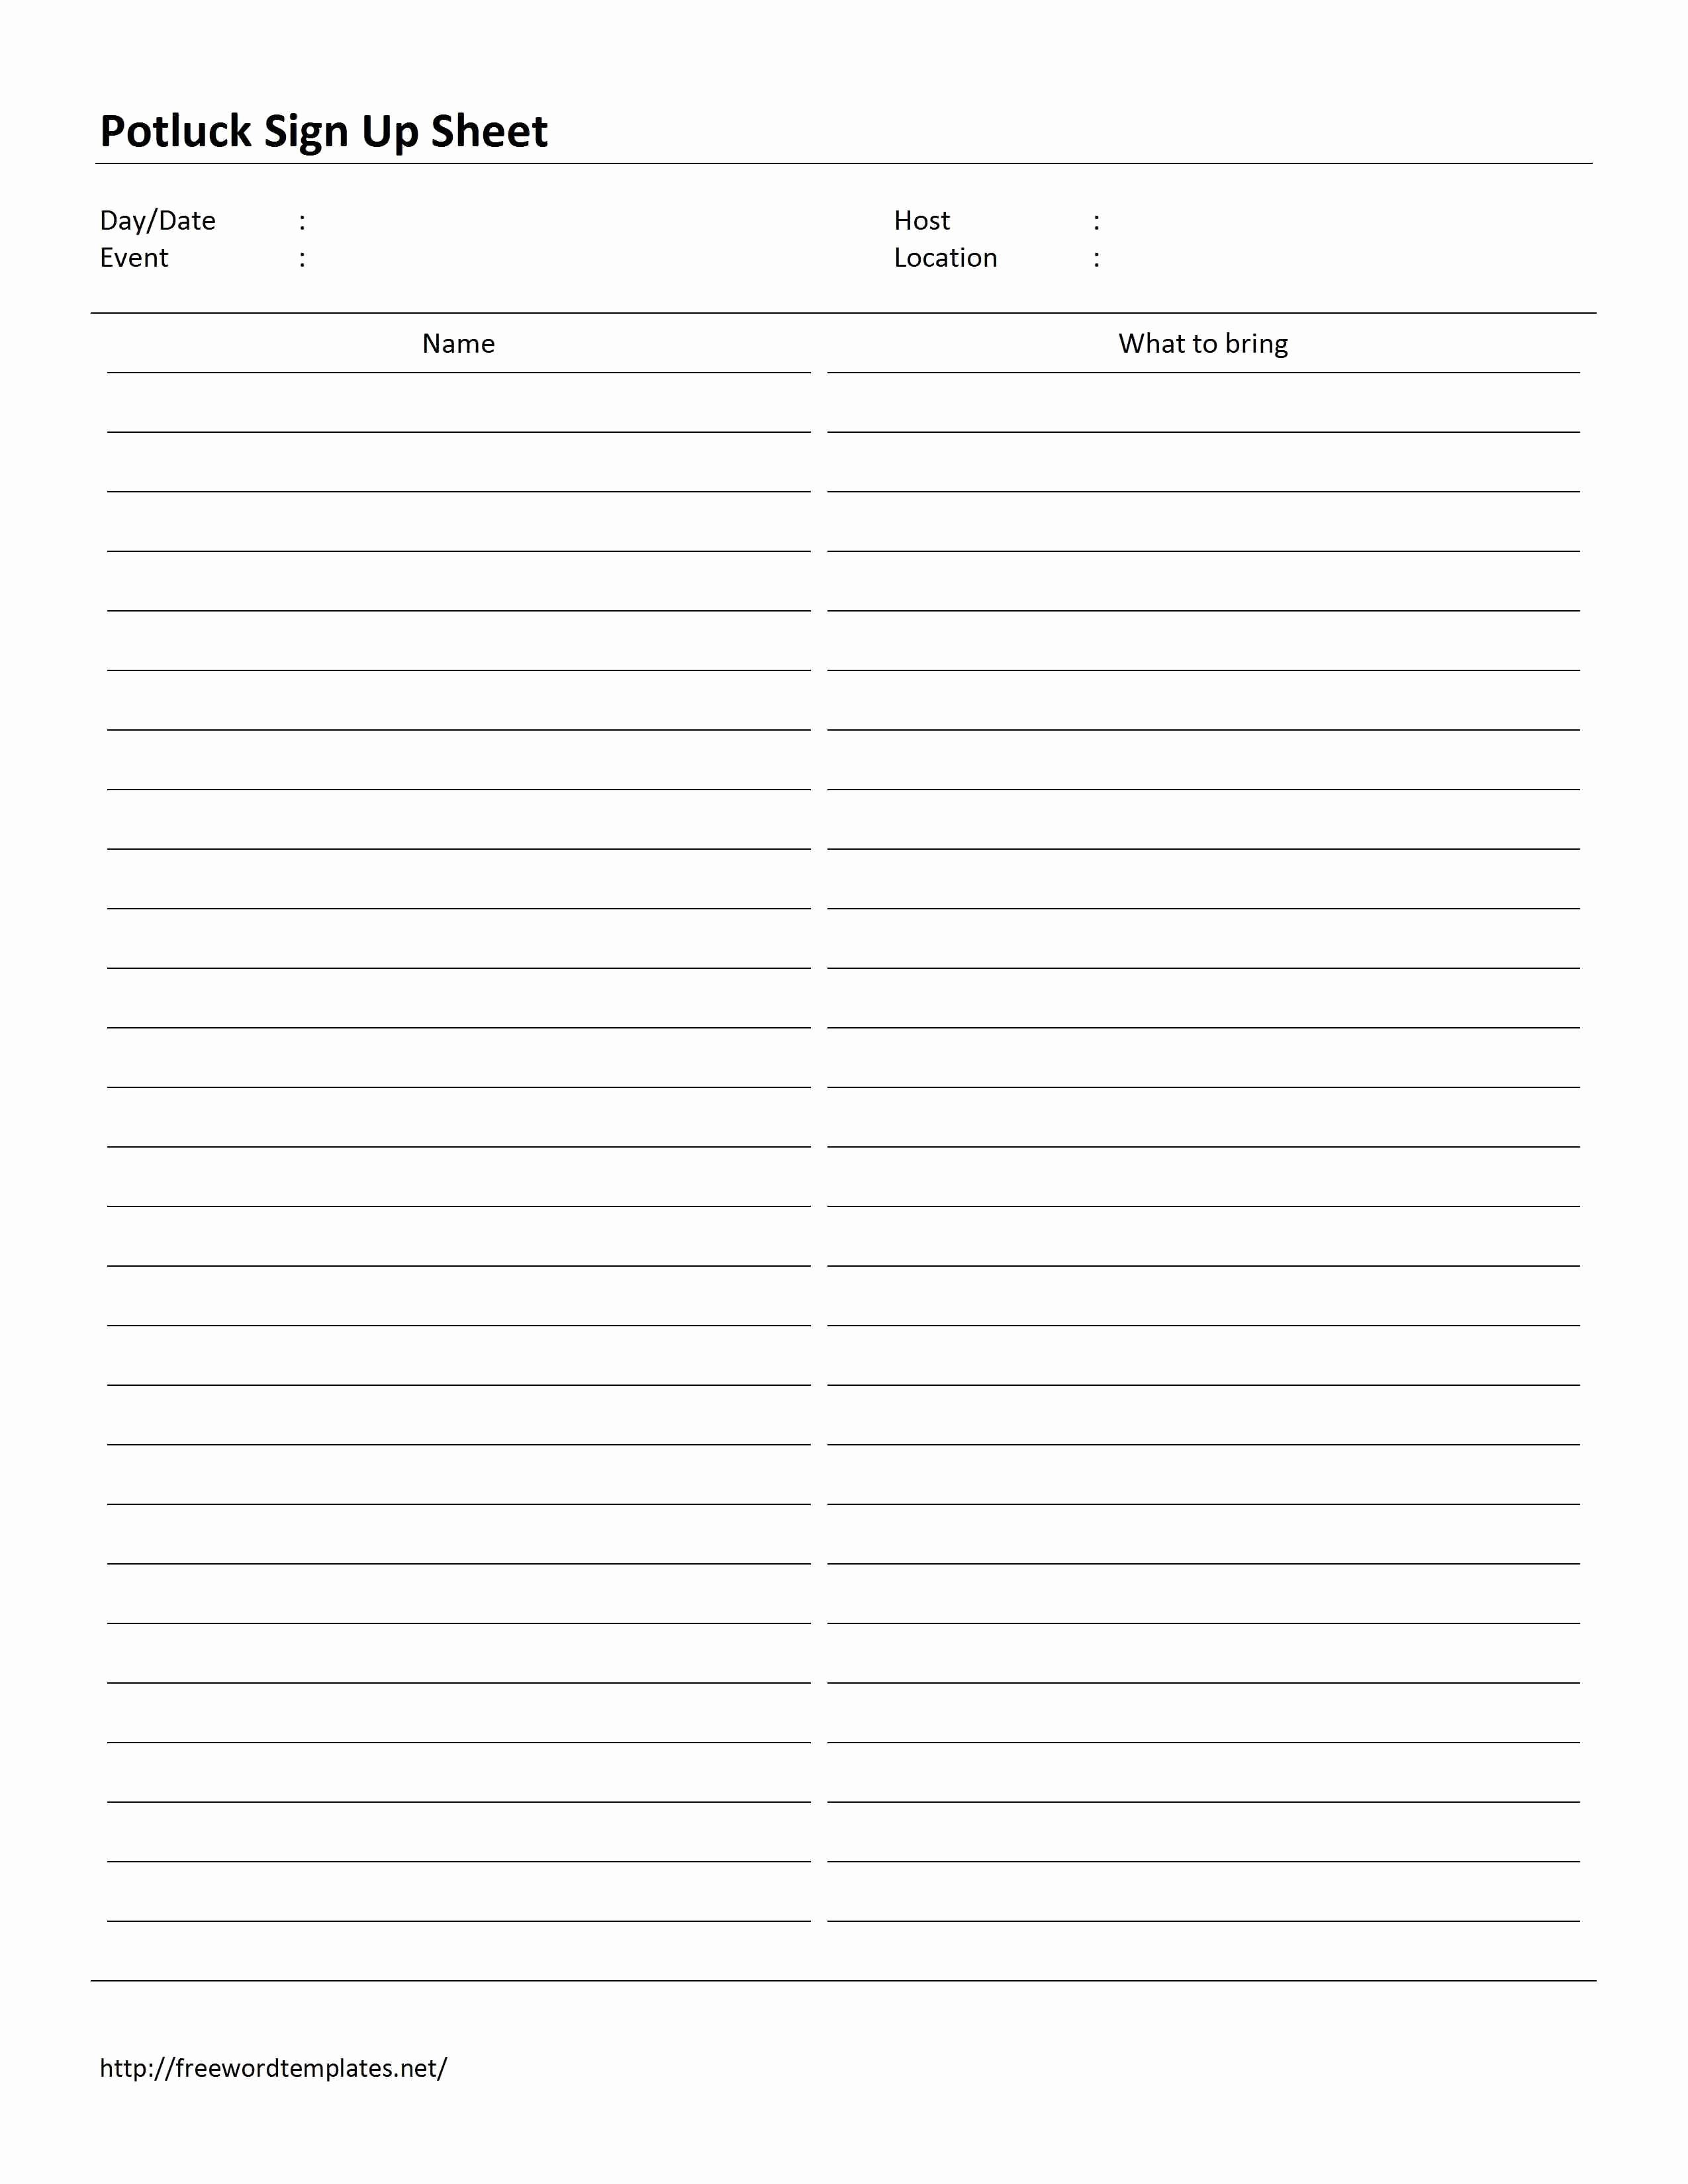 Email Signup Sheet Template Best Of Potluck Sign Up Sheet Template Word